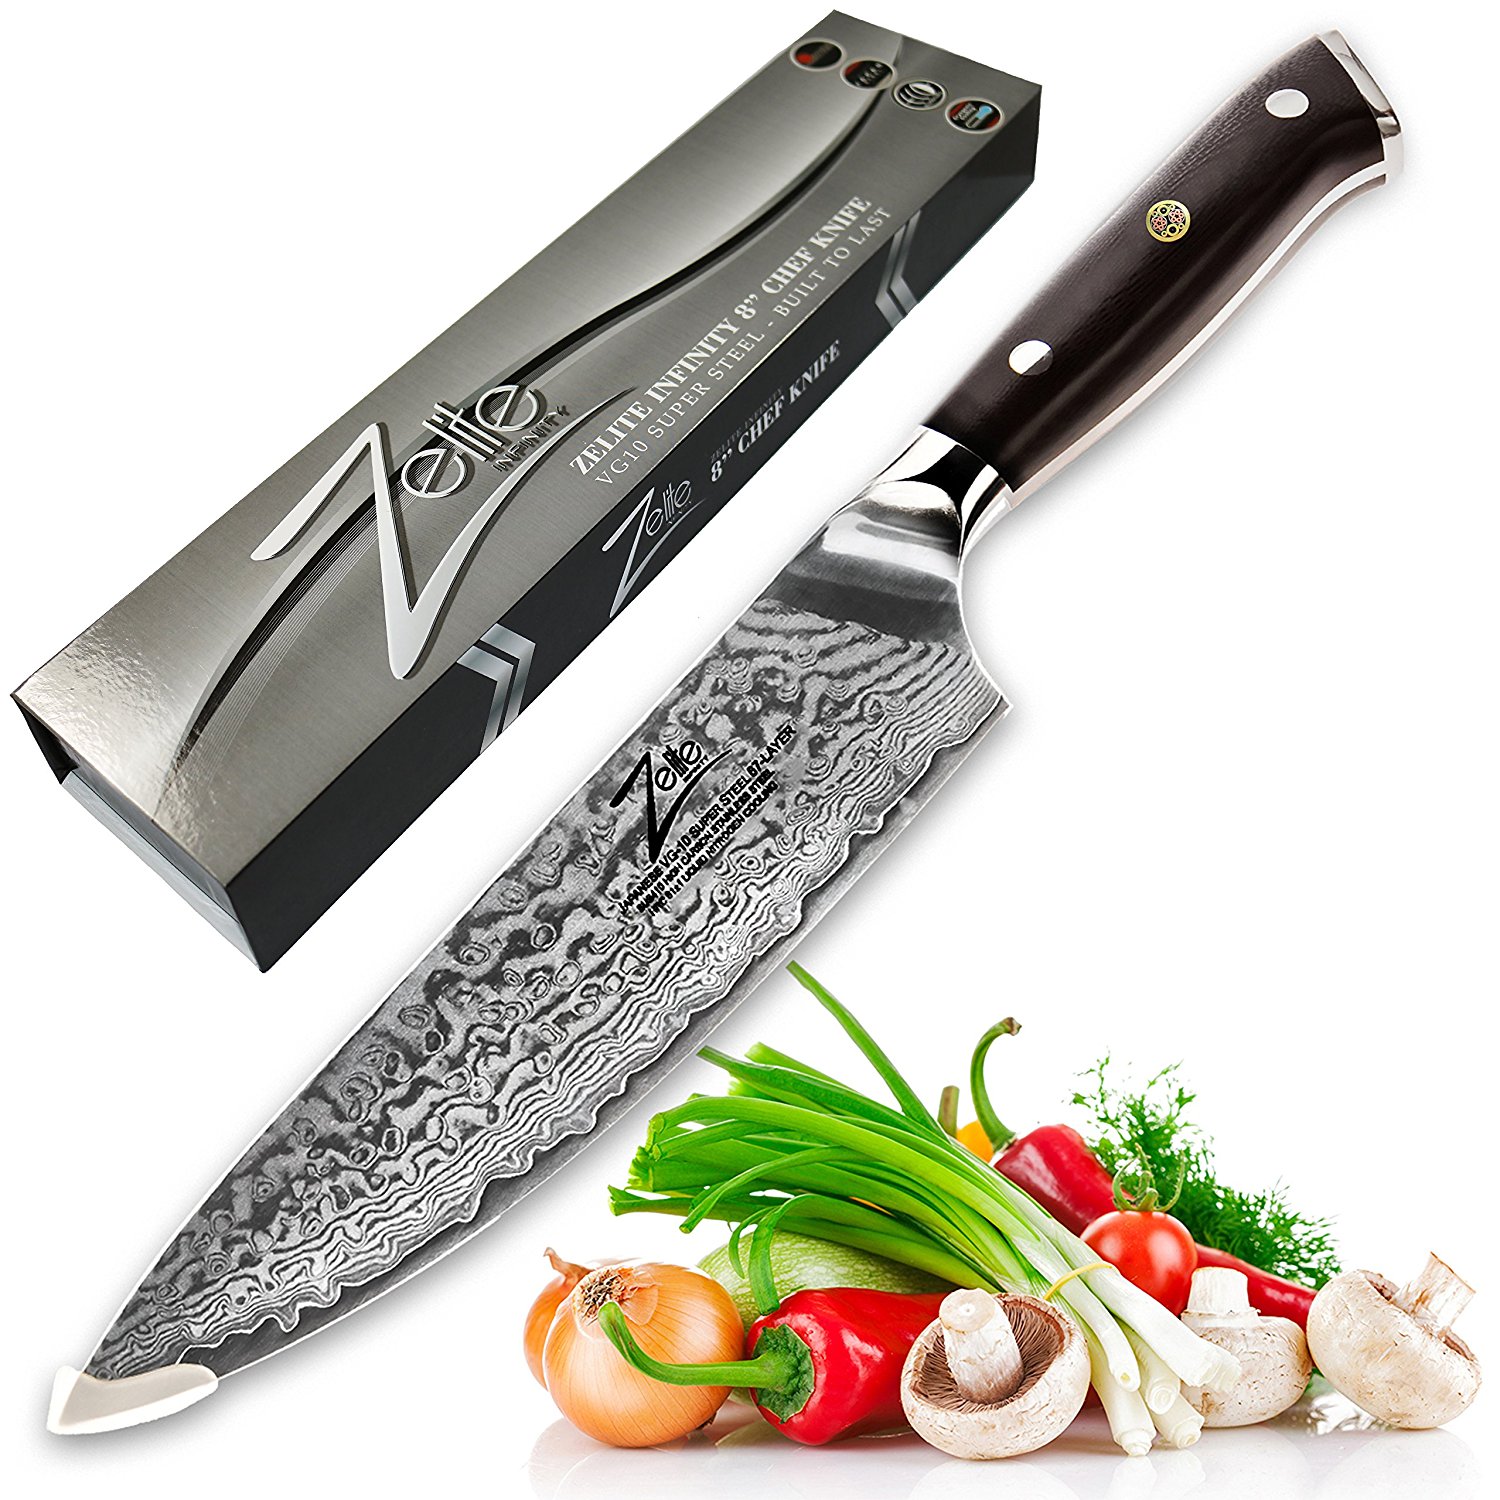 Best Japanese Chef Knife Which Should I Buy? All Knives